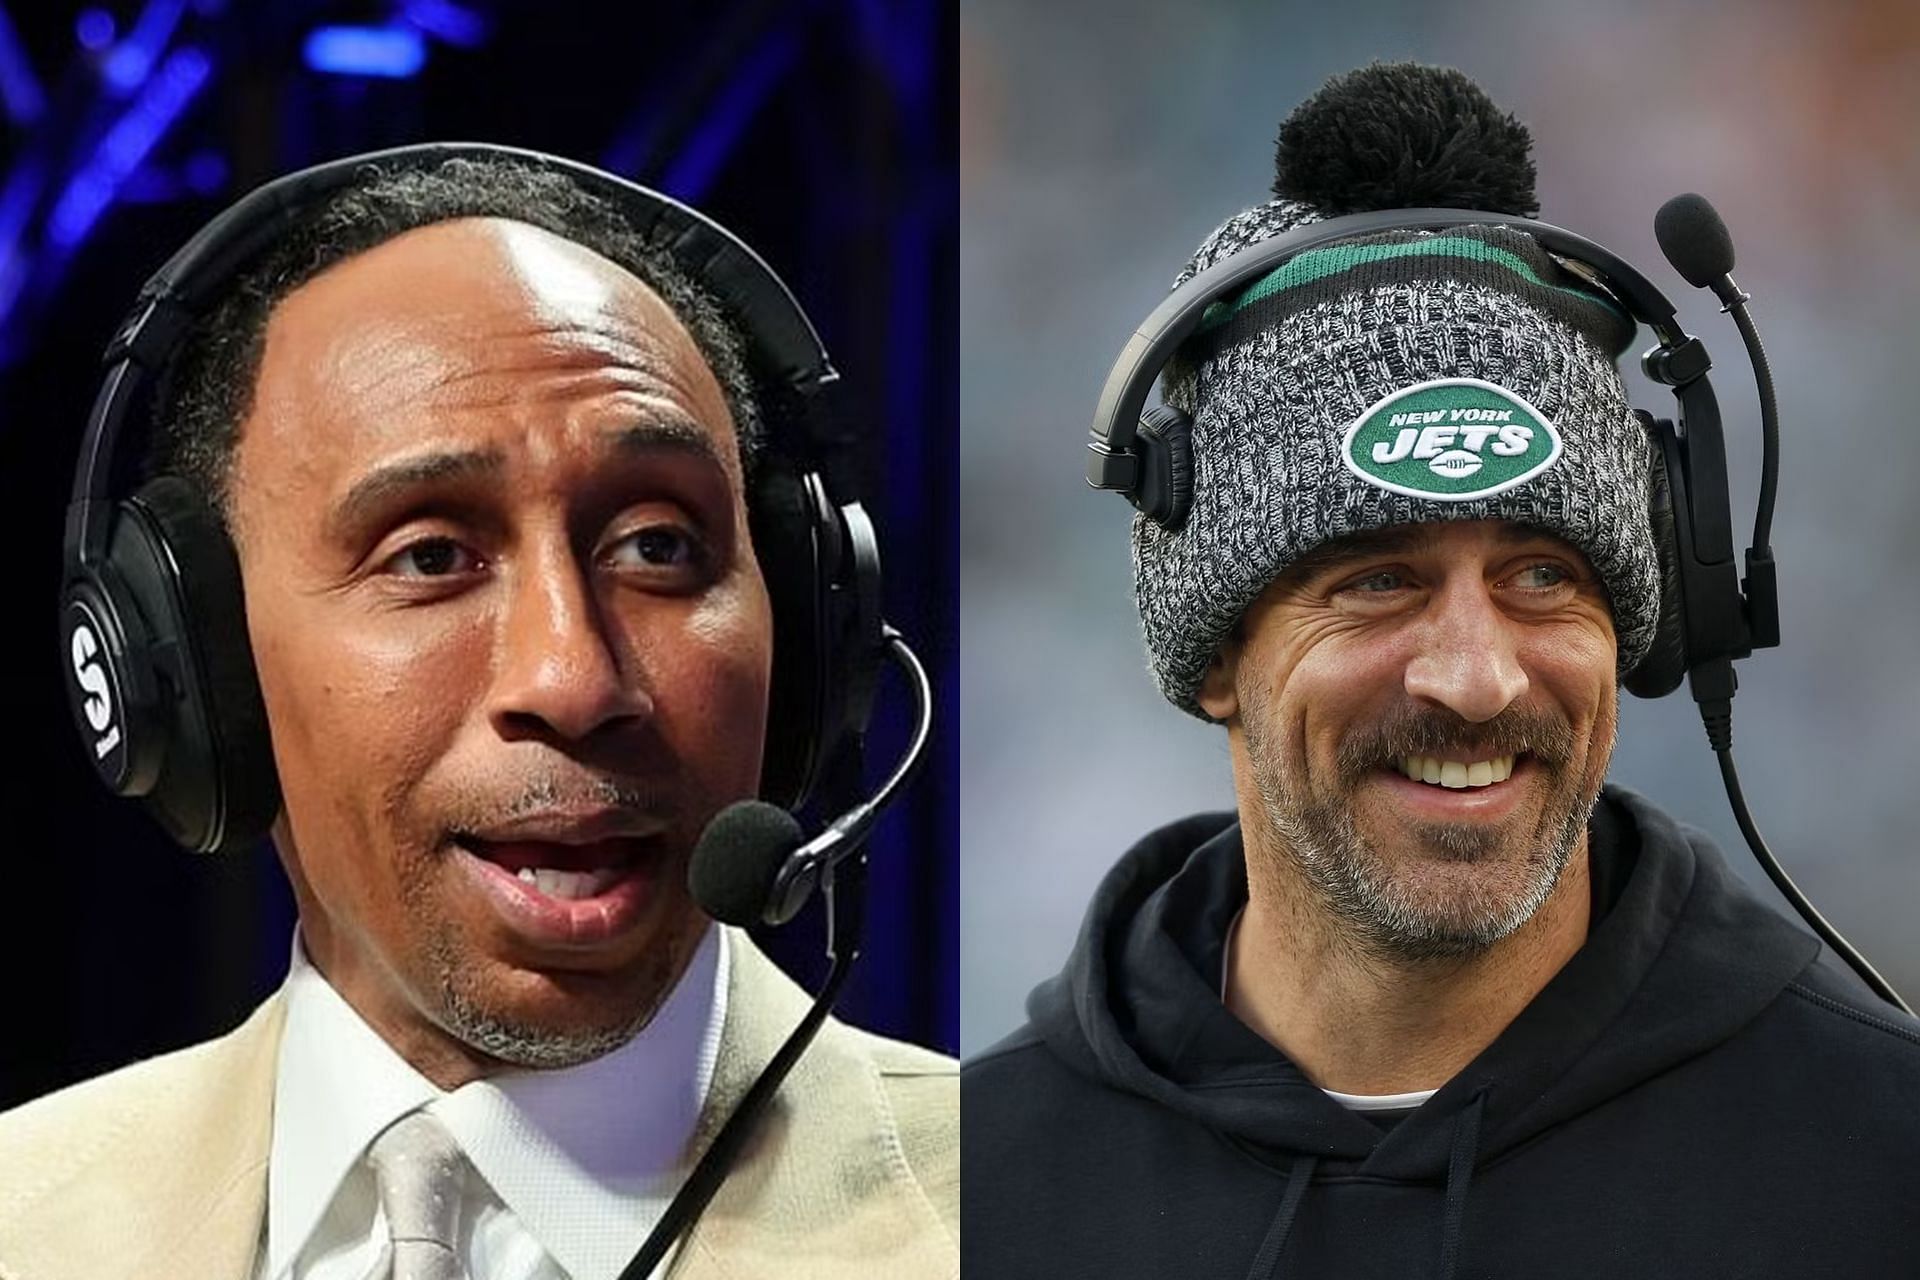 Aaron Rodgers Sandy Hook controversy: Stephen A. Smith questions motive behind CNN report